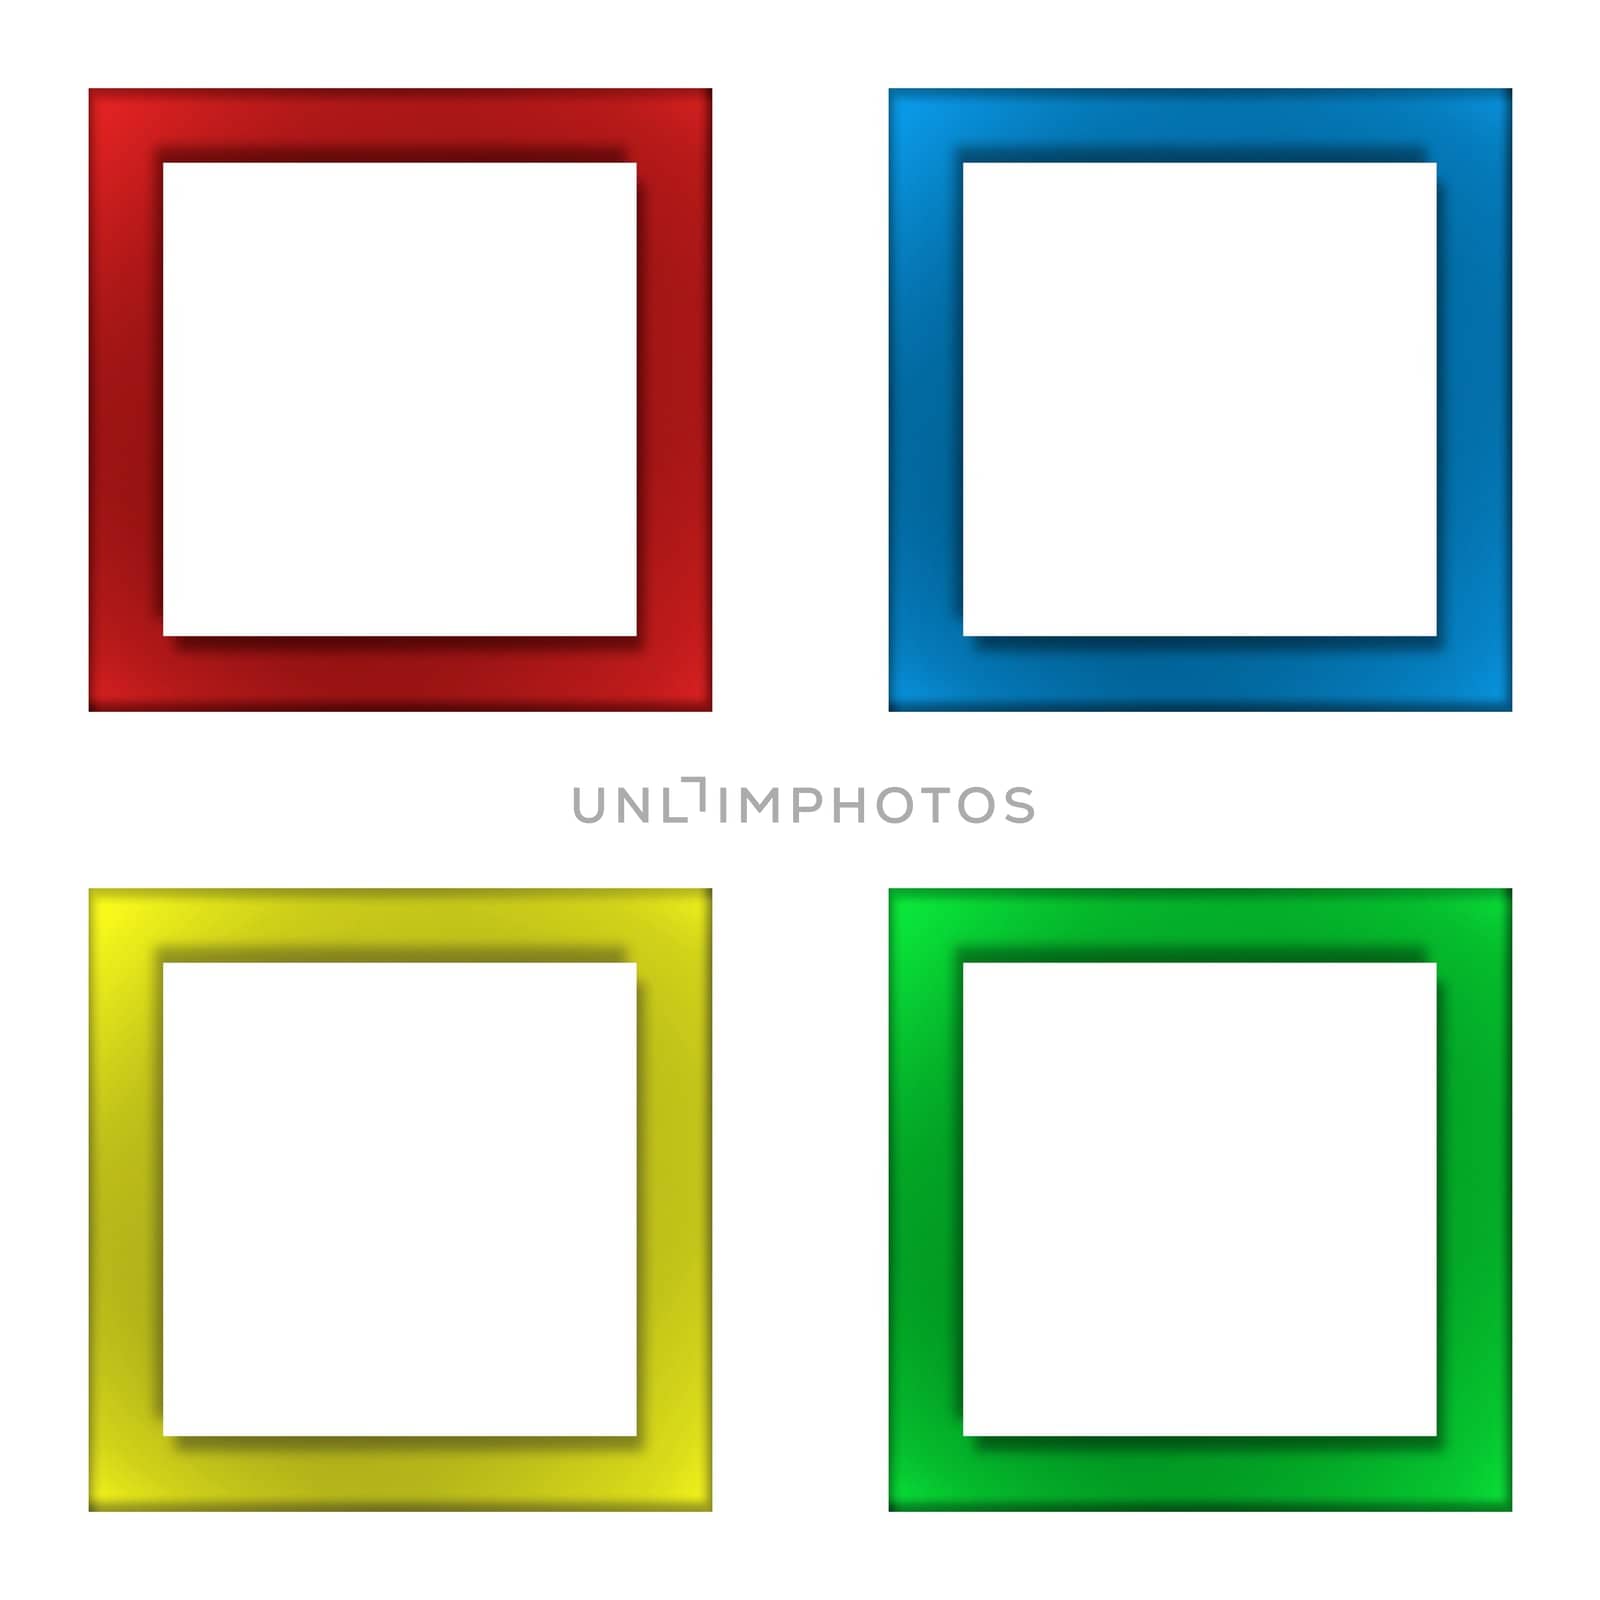 Illustration abstract squares isolated against a white background